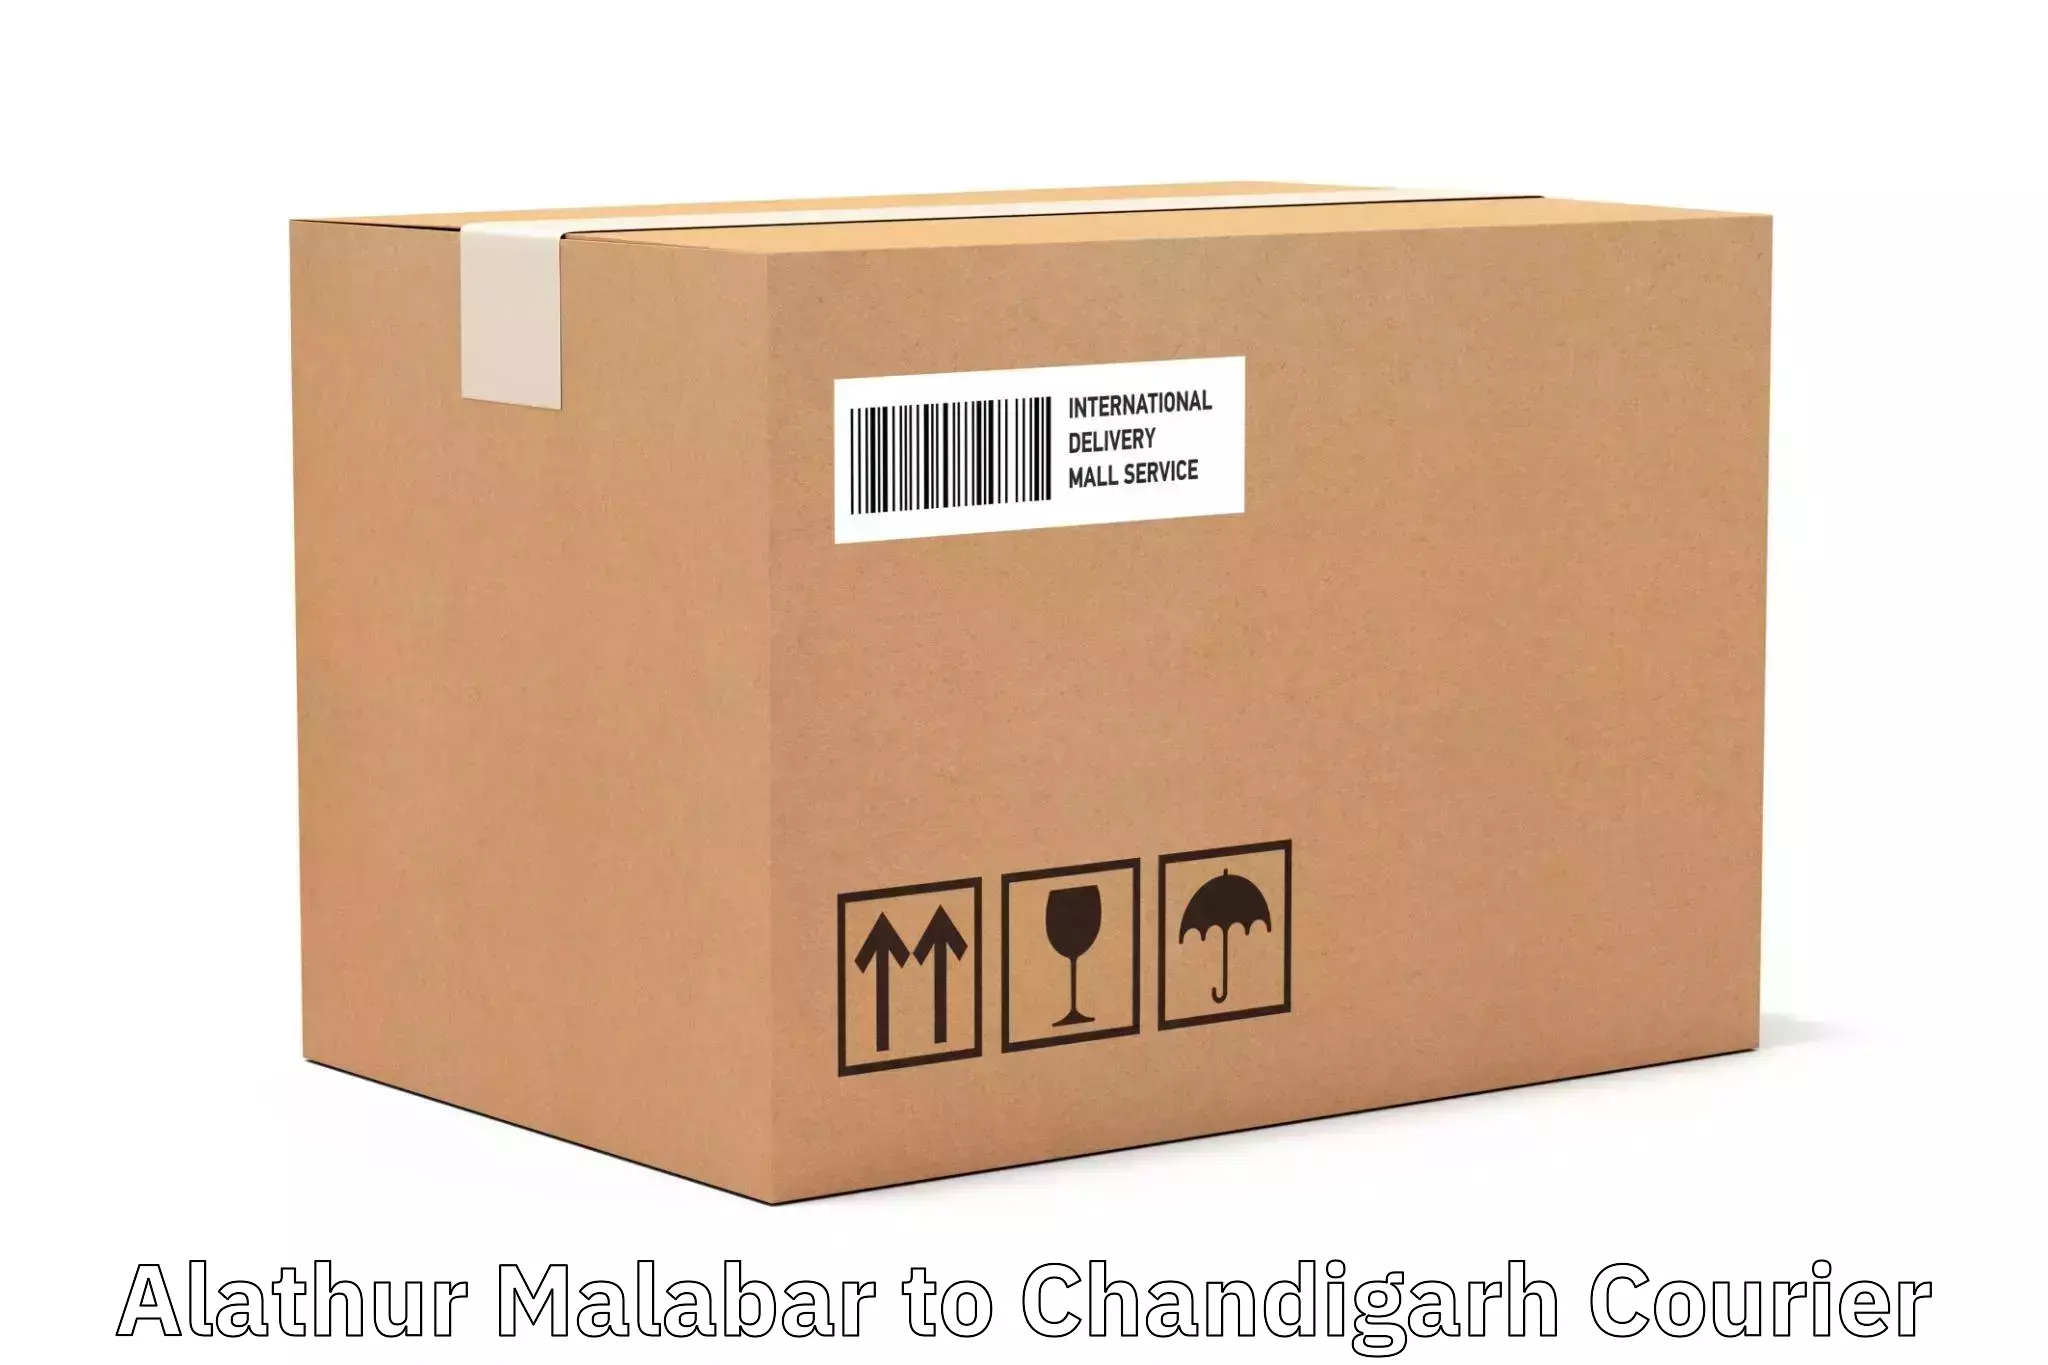 Personal courier services Alathur Malabar to Chandigarh